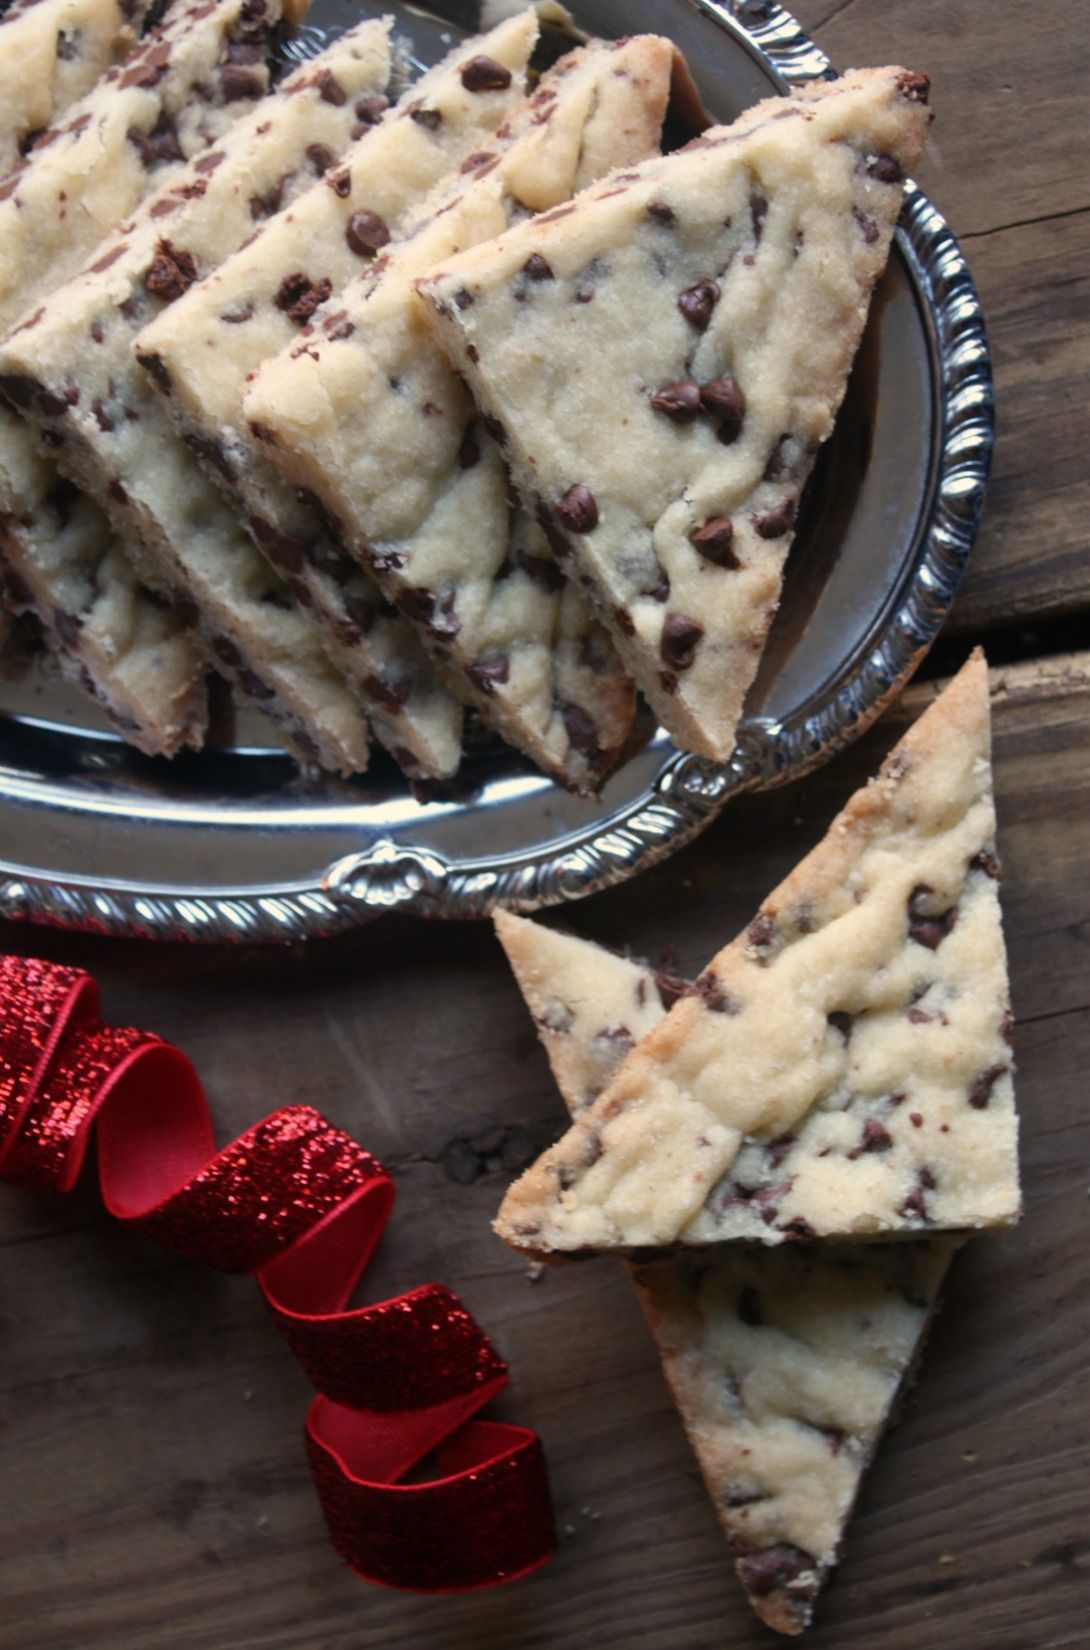 Chocolate Chip Shortbread Cookies – try these with xylitol & different flour